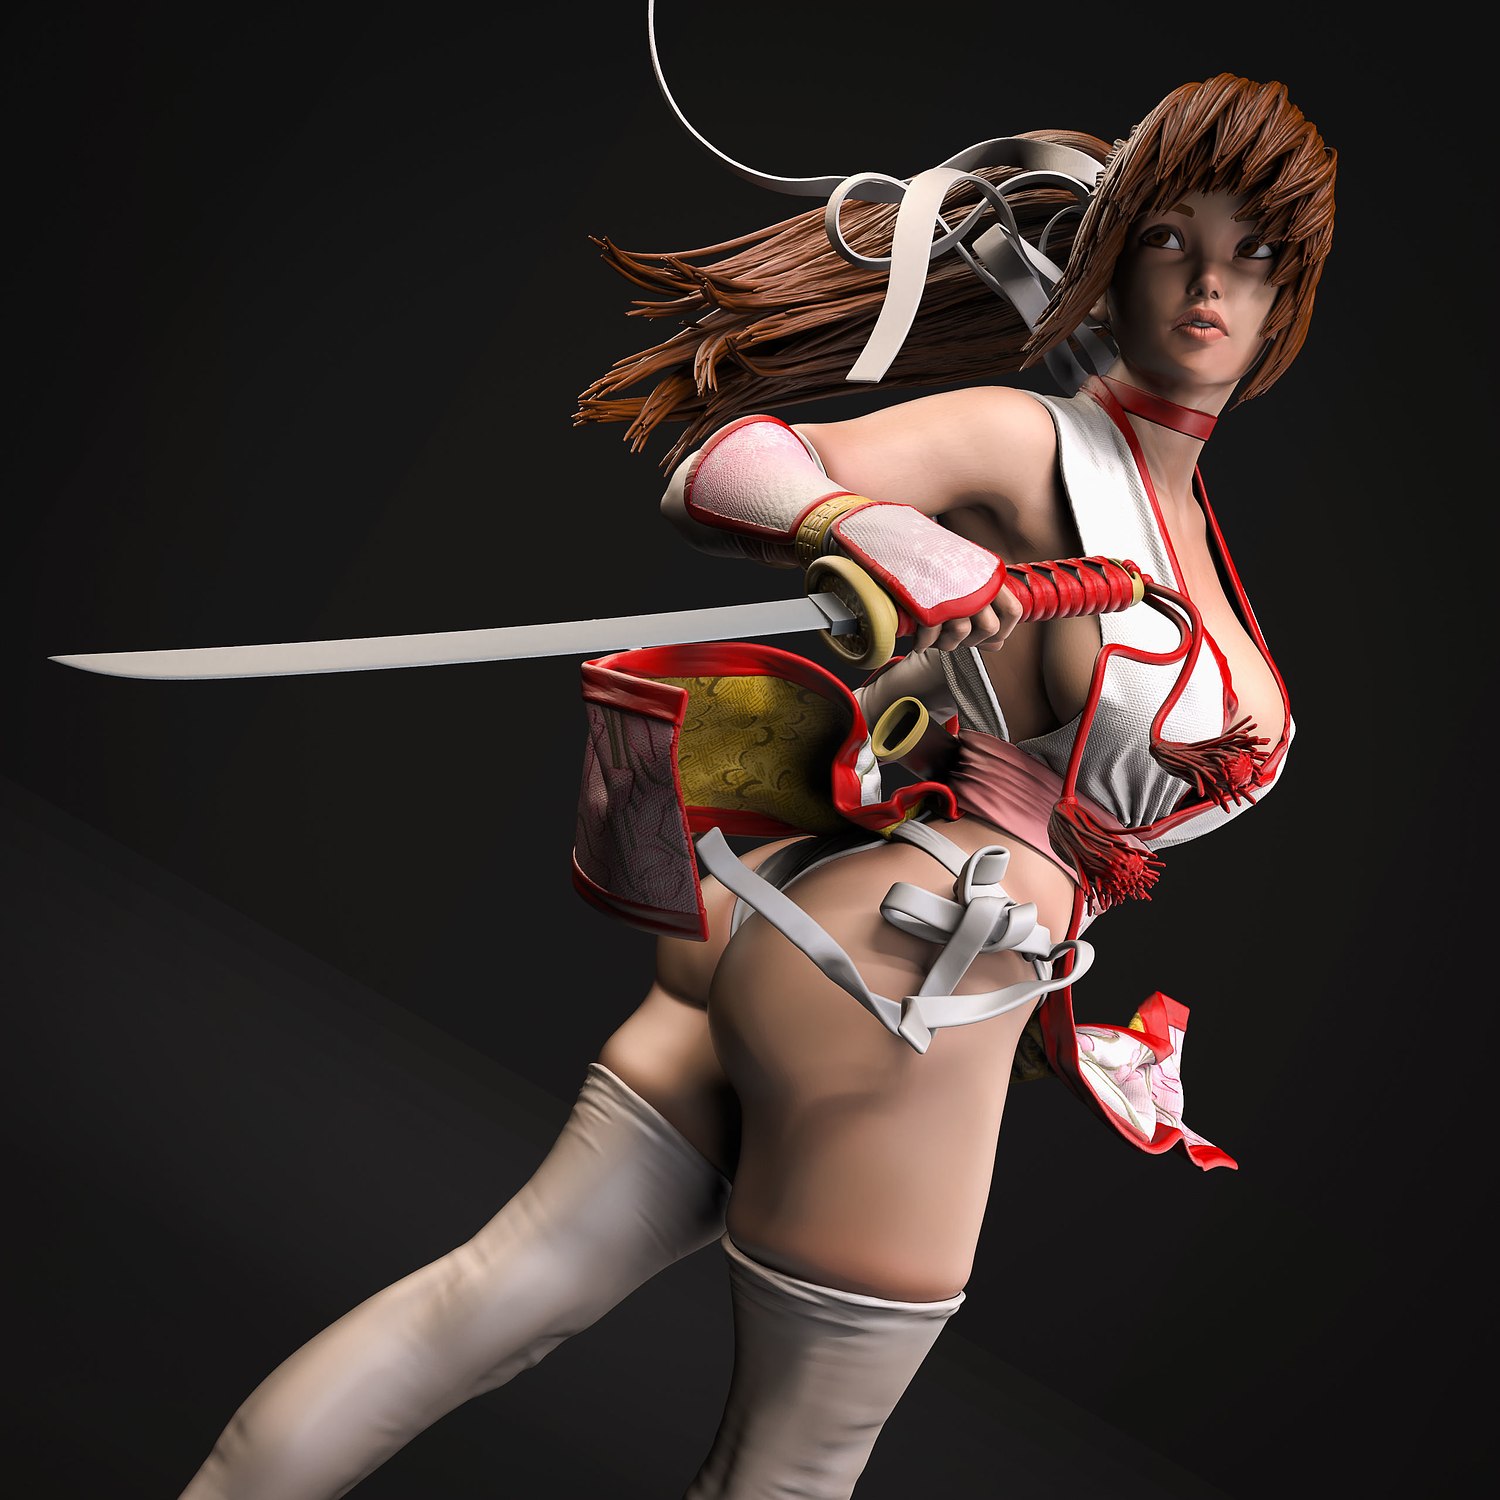 Kasumi Pose 2 From Dead or Alive